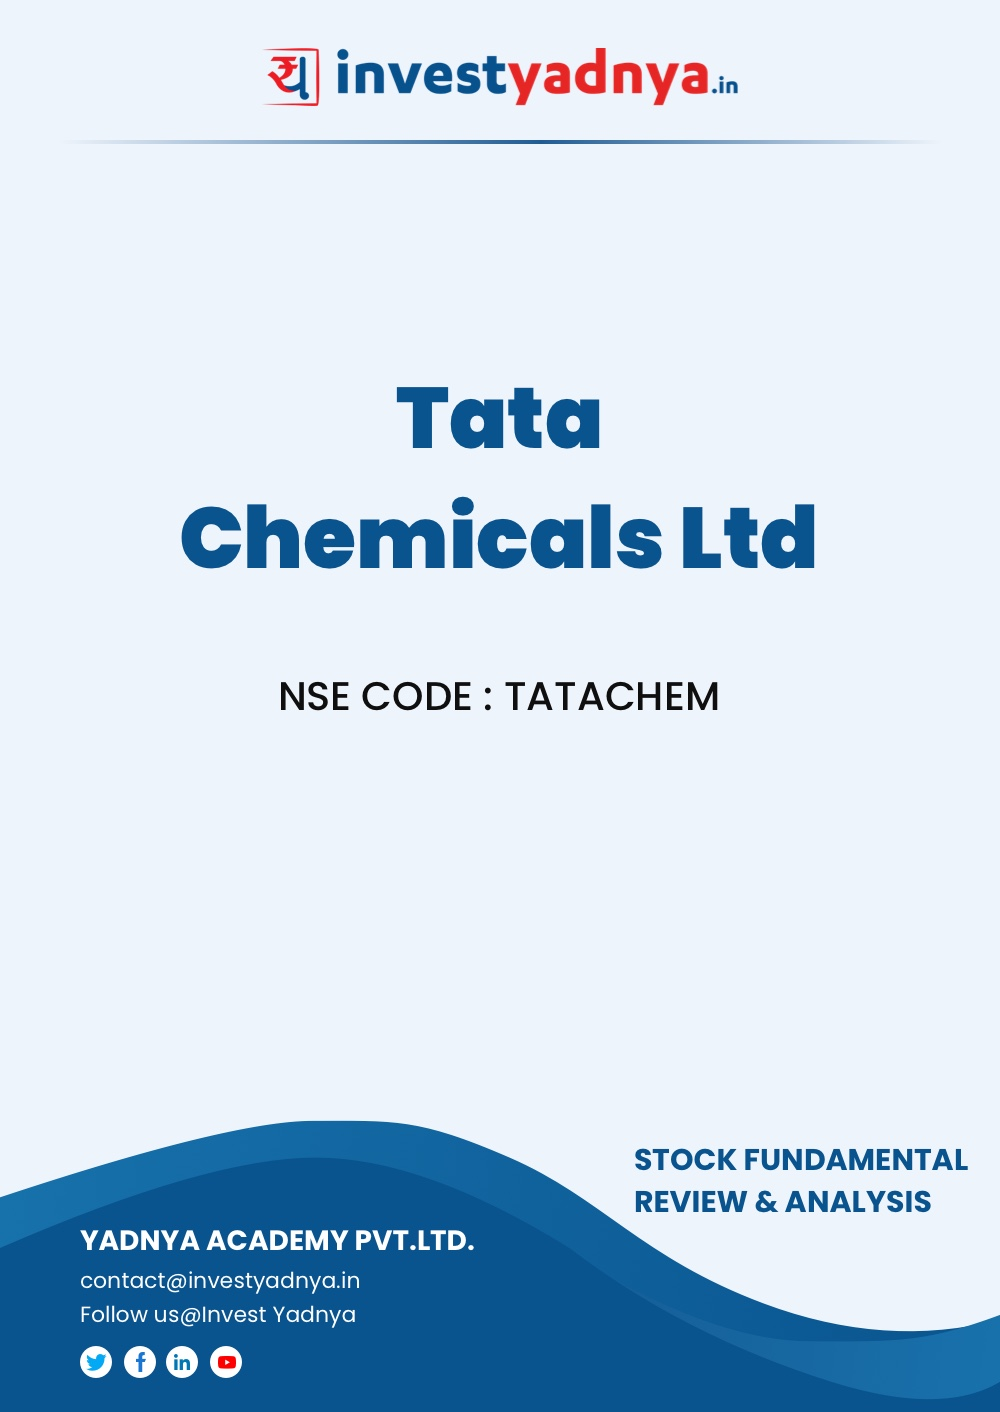 Tata Chemicals Limited - Company/Stock Review based on Q1 2021-22 and FY 2020-21 data. The ebook contains Fundamental Analysis of the company considering both Quantitative (Financial) and Qualitative Parameters. Tata Chemicals has presence in Soda Ash manufacturing, Salt manufacturing and Agro chemicals manufacturing